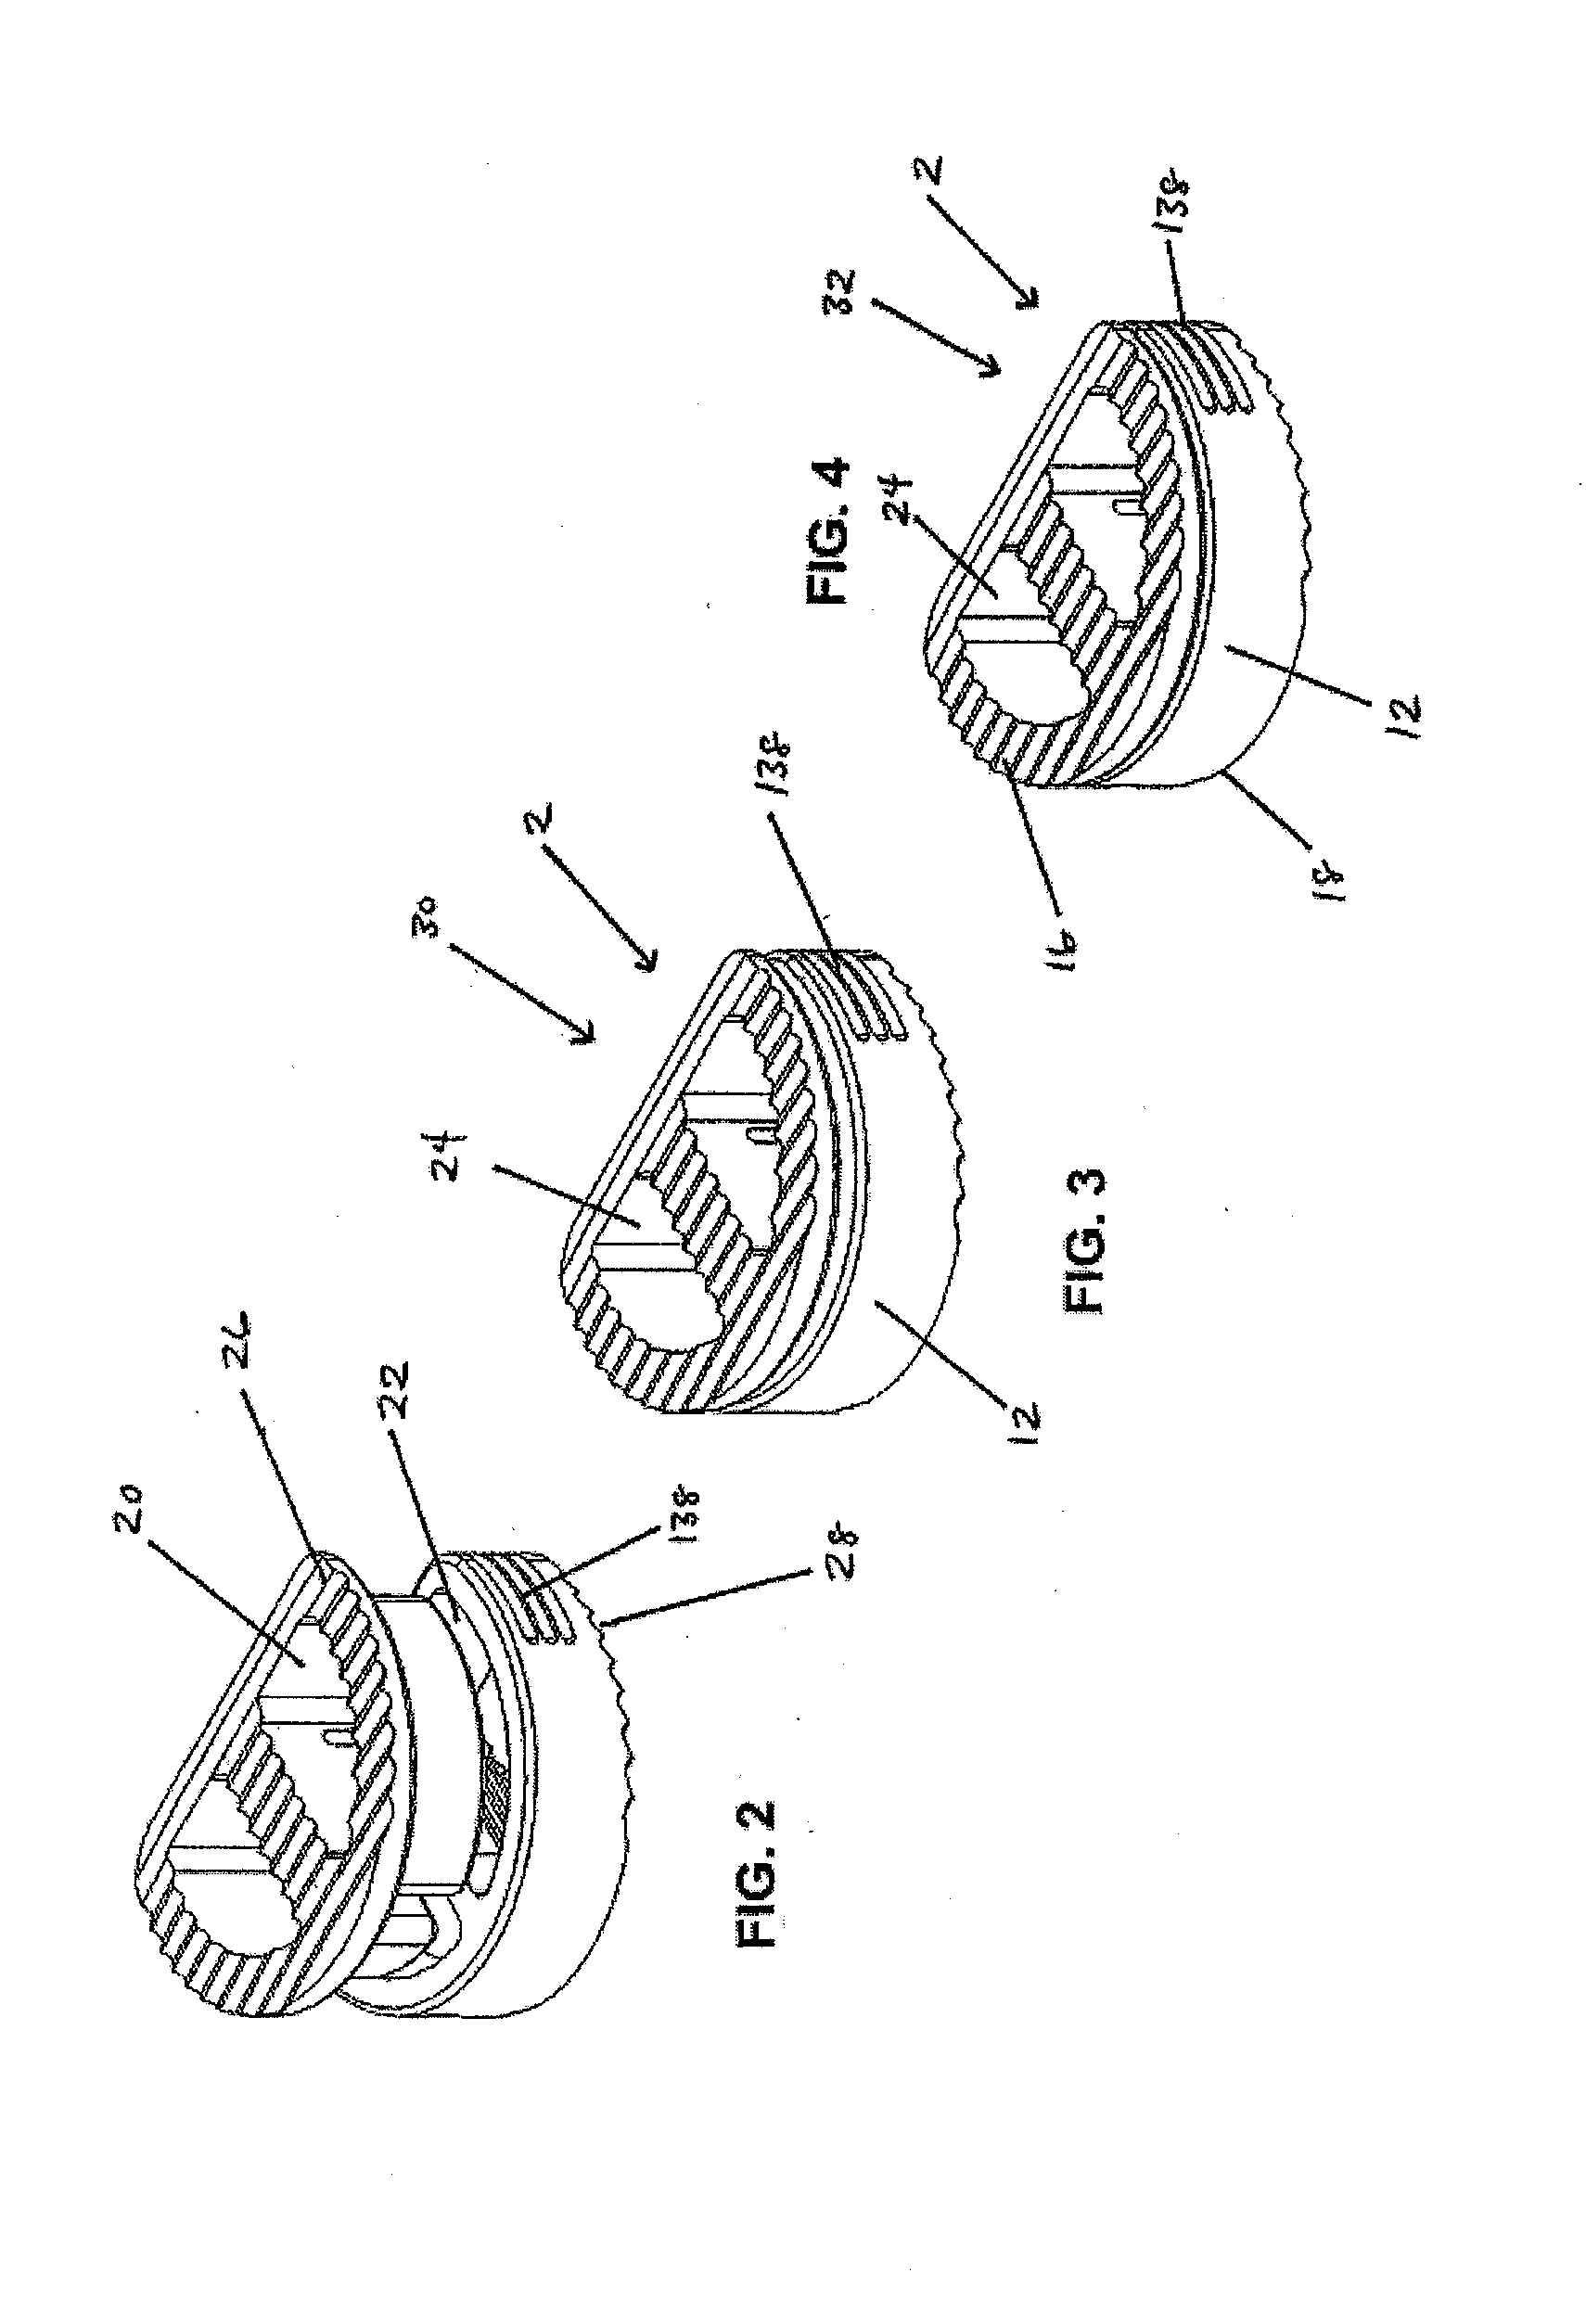 Implant for Deploying Bone Graft Material and Methods Thereof